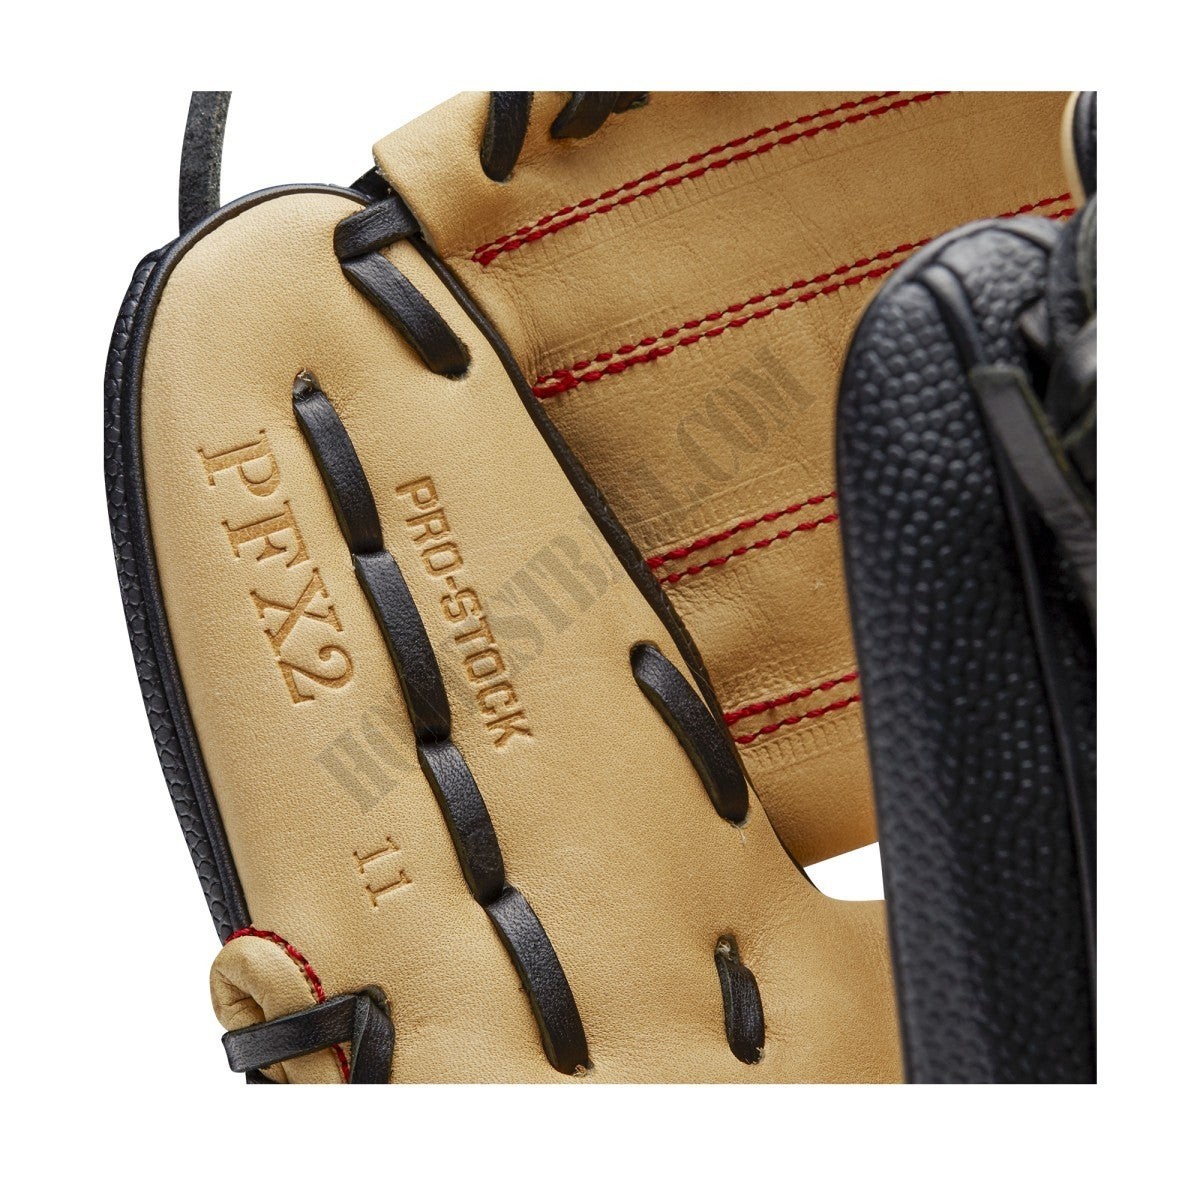 2021 A2000 PFX2SS 11" Pedroia Fit Infield Baseball Glove ● Wilson Promotions - -7